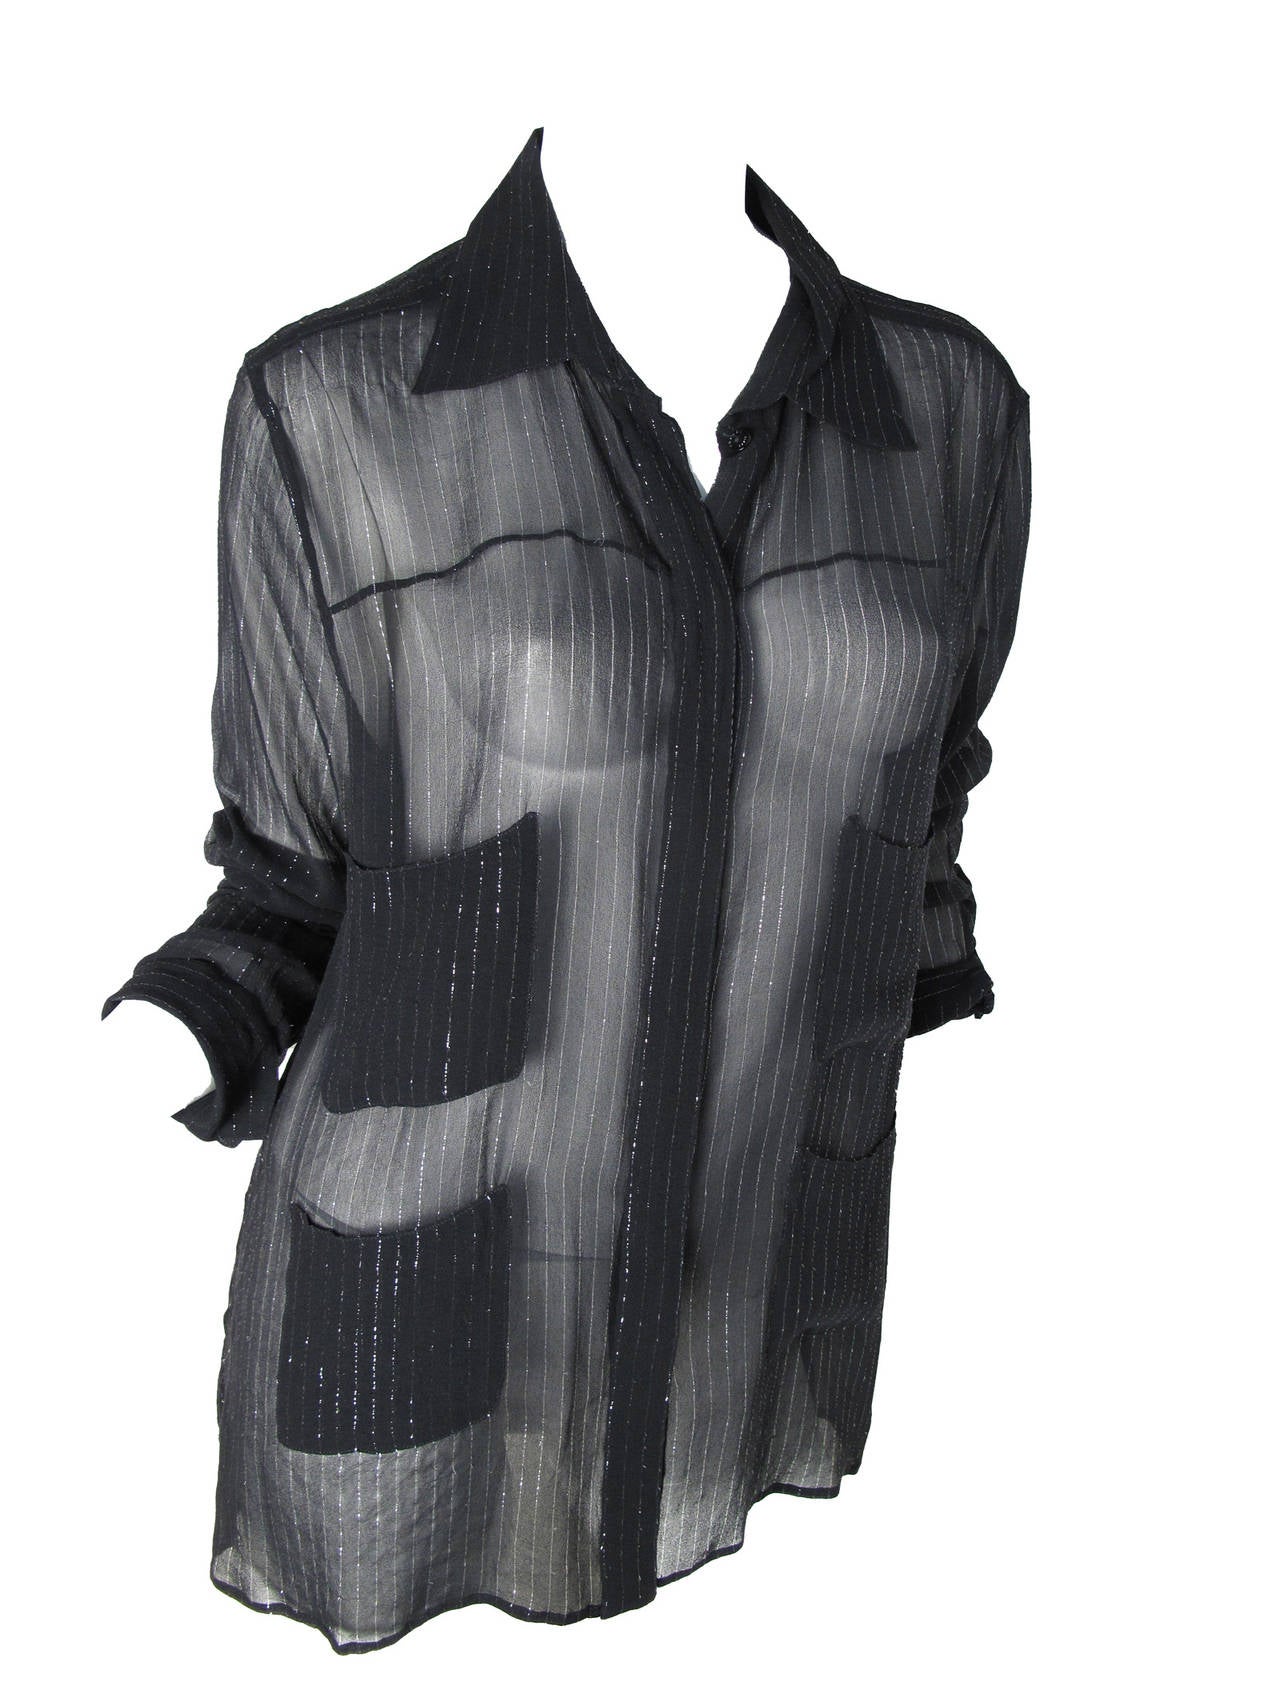 Chanel black sheer blouse with silver metallic stripe c. 2004.  Four front pockets.  42